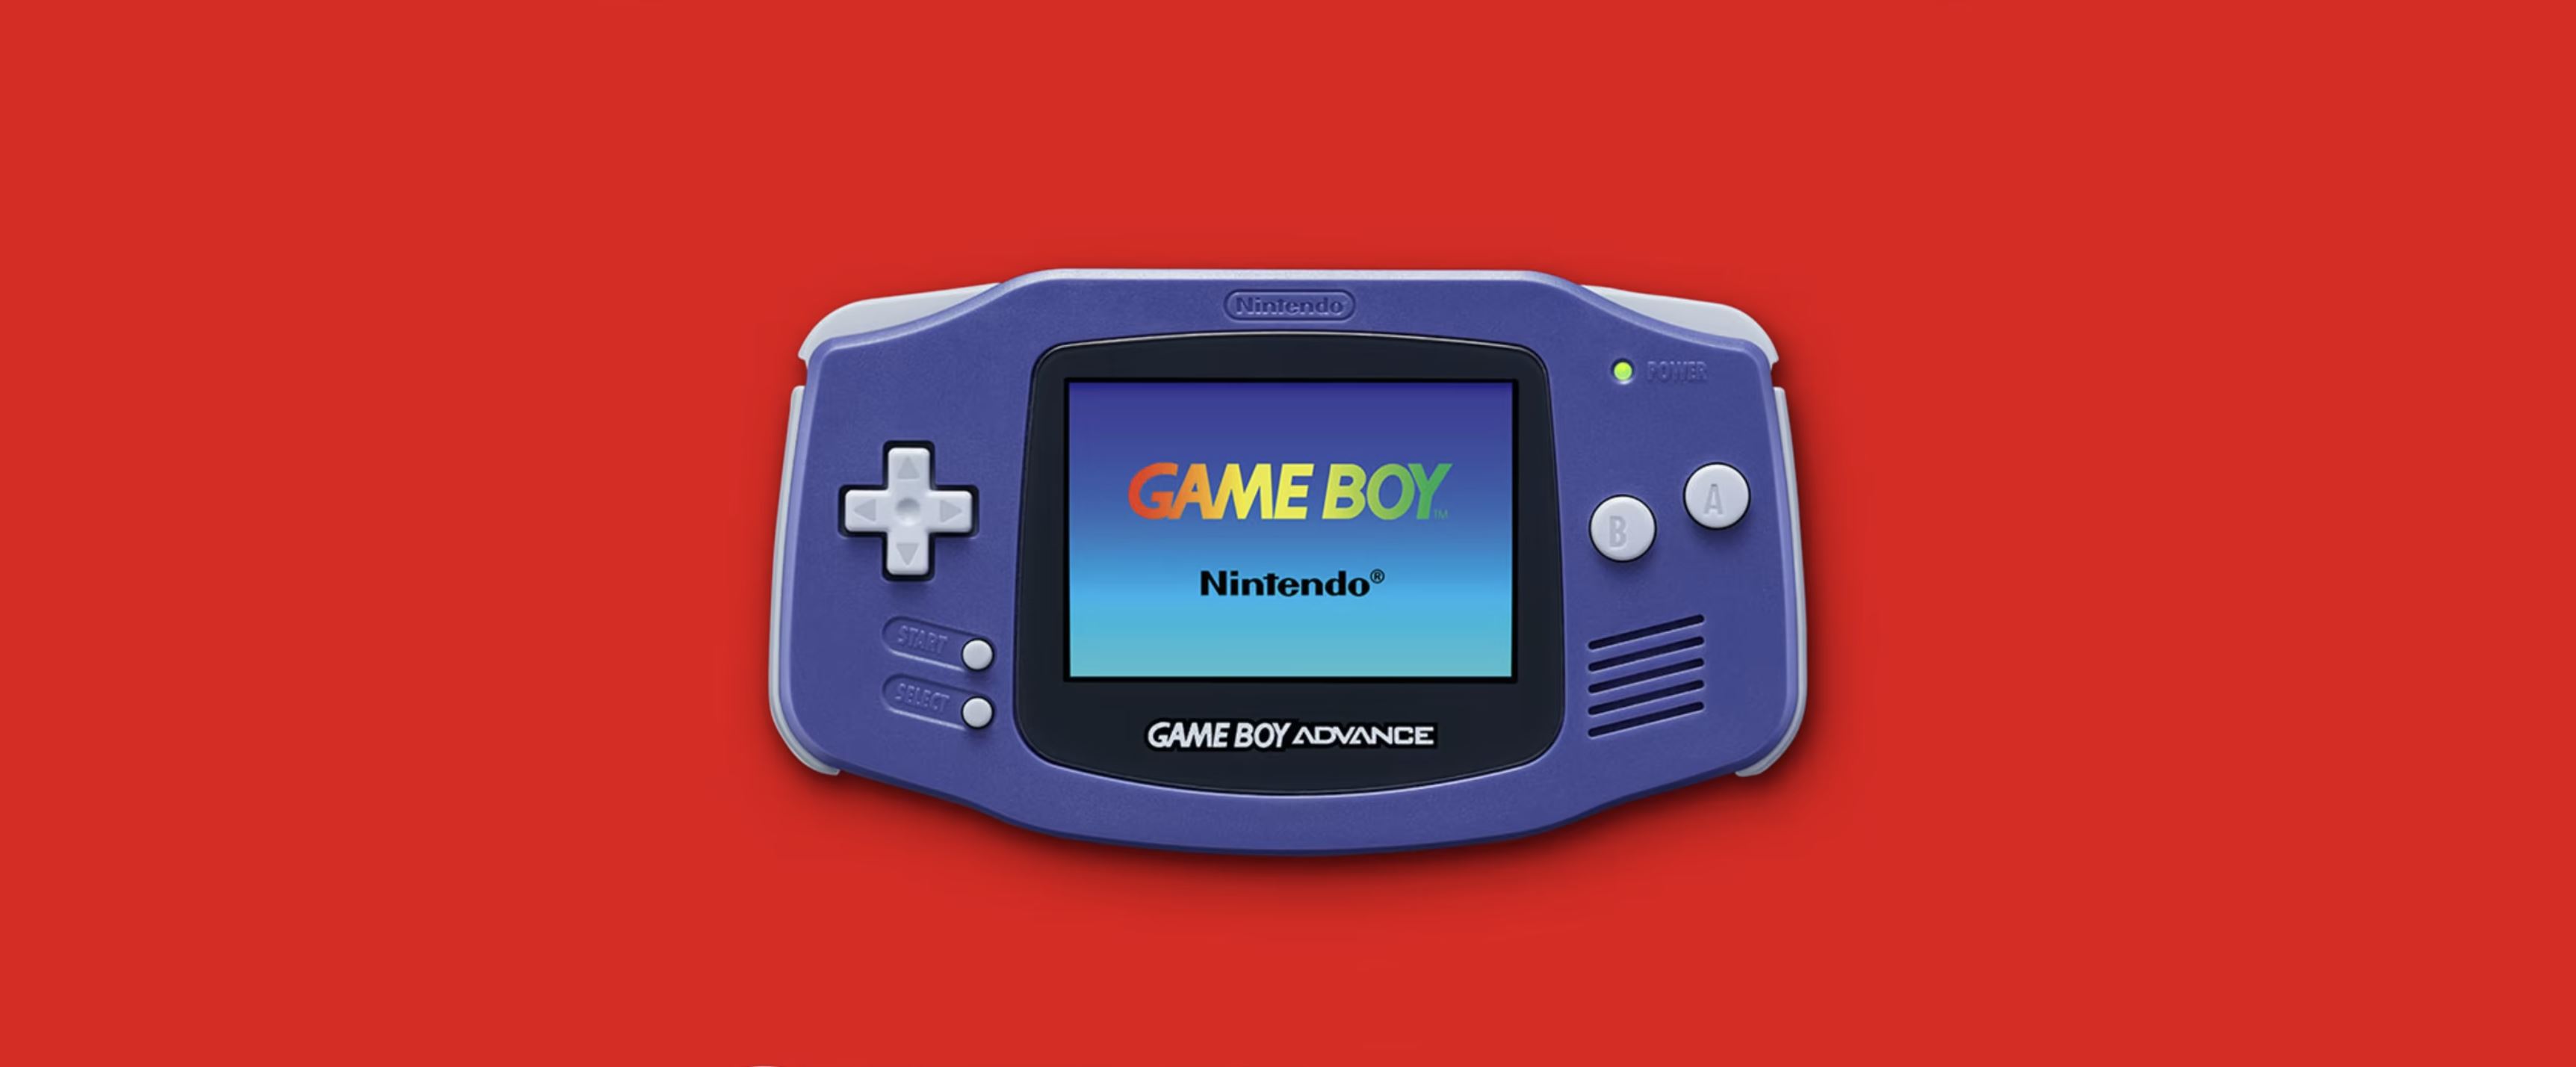 Game Boy and GBA games now playable on Nintendo Switch - Polygon